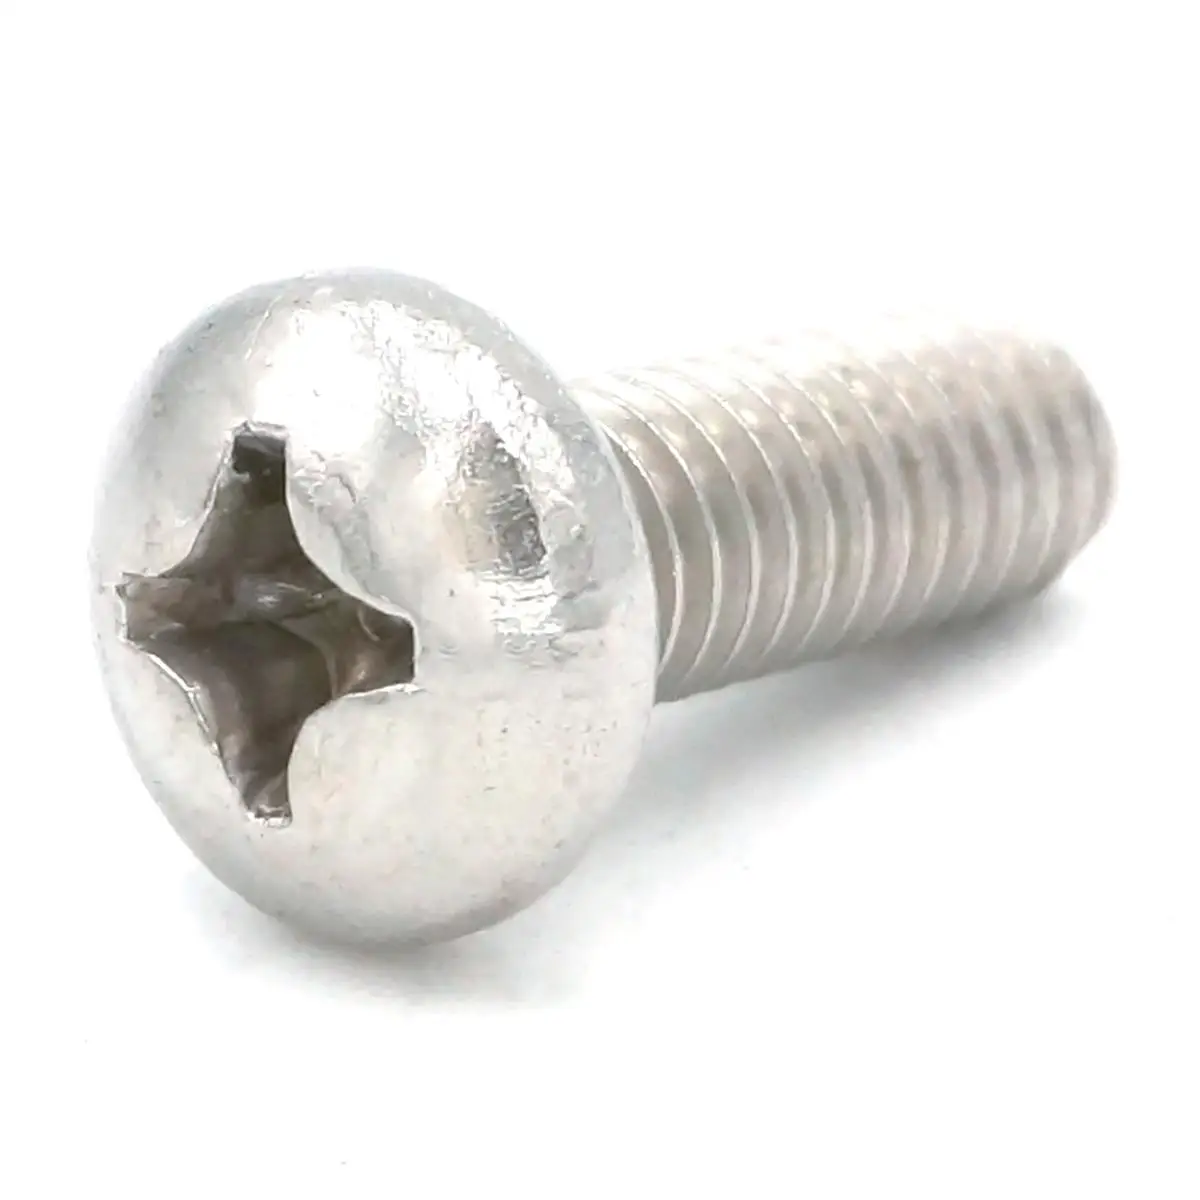 

5pcs M6*16 Pitch 1.0 Phillips Pan Head 304 Stainless Steel Cross Recessed Machine Screws Cap Bolts Nuts